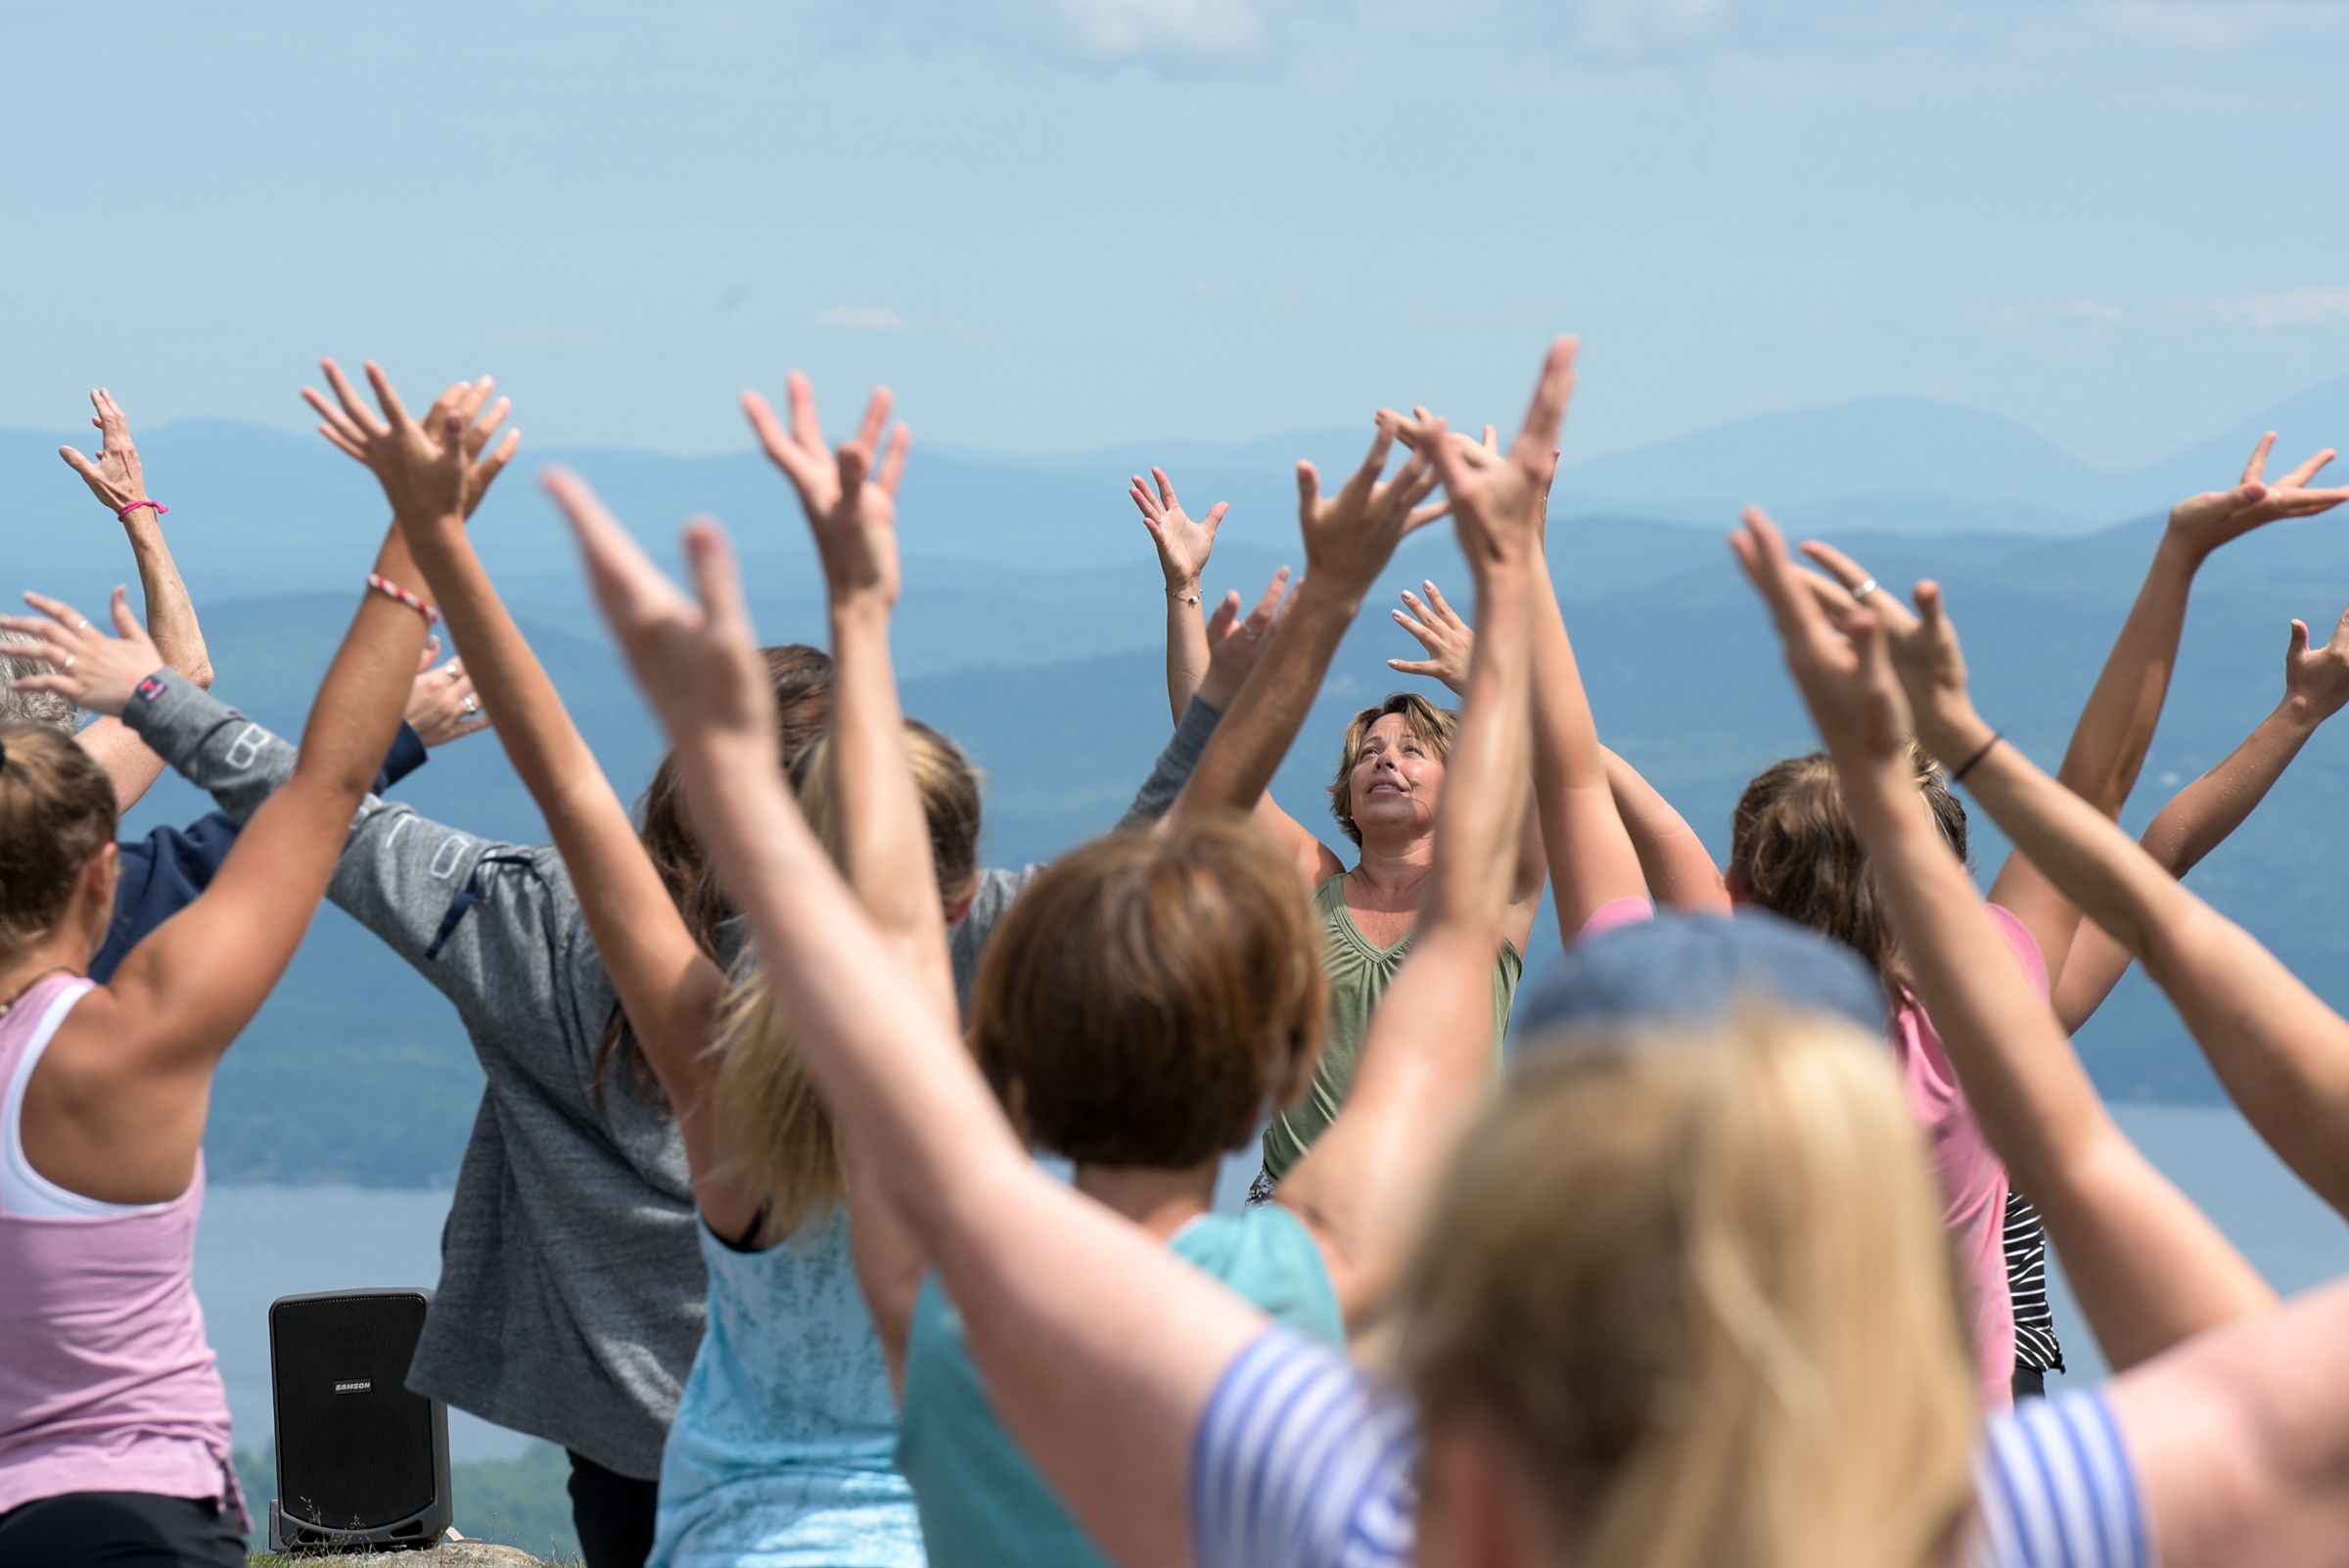 Yoga instructor Leigh Ann Root leads sun salutations durig her yoga class at the top of Mount Sunapee in Newbury, N.H., Wednesday, July 11, 2018. (Valley News - James M. Patterson) Copyright Valley News. May not be reprinted or used online without permission. Send requests to permission@vnews.com.